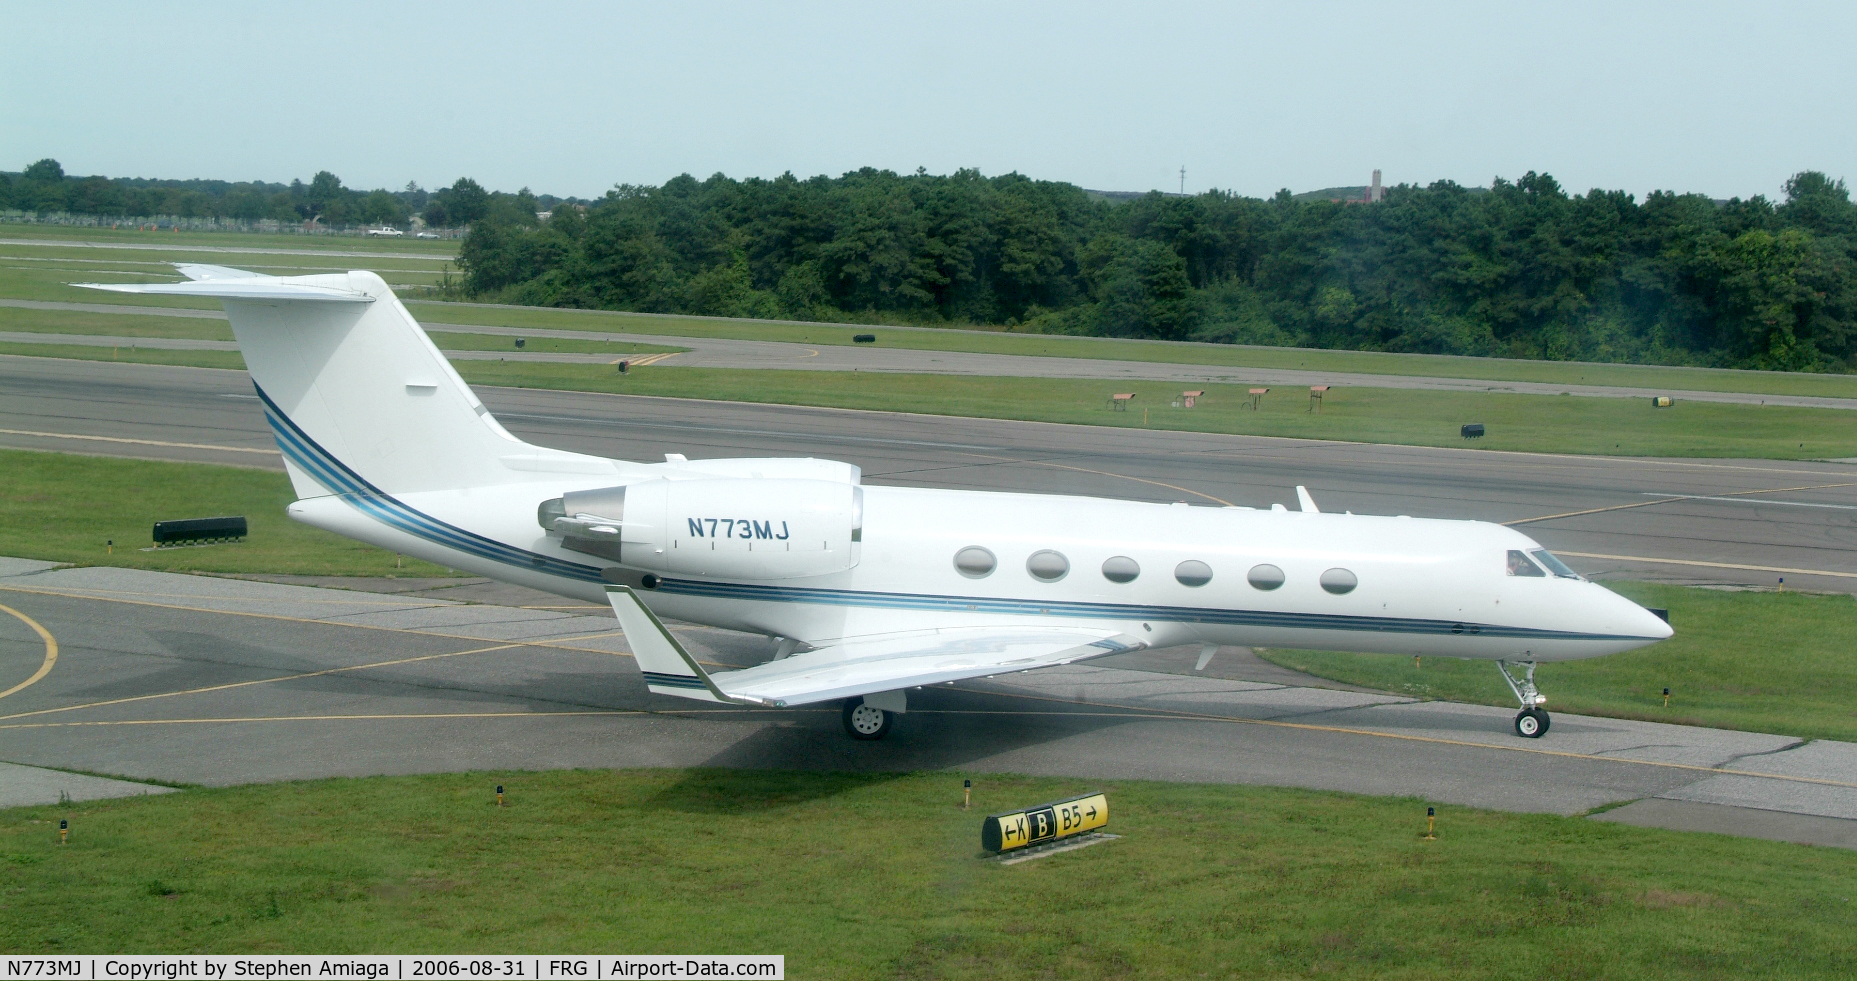 N773MJ, 1993 Gulfstream Aerospace G-IV C/N 1225, G-IV taxiing to the active RWY 1.